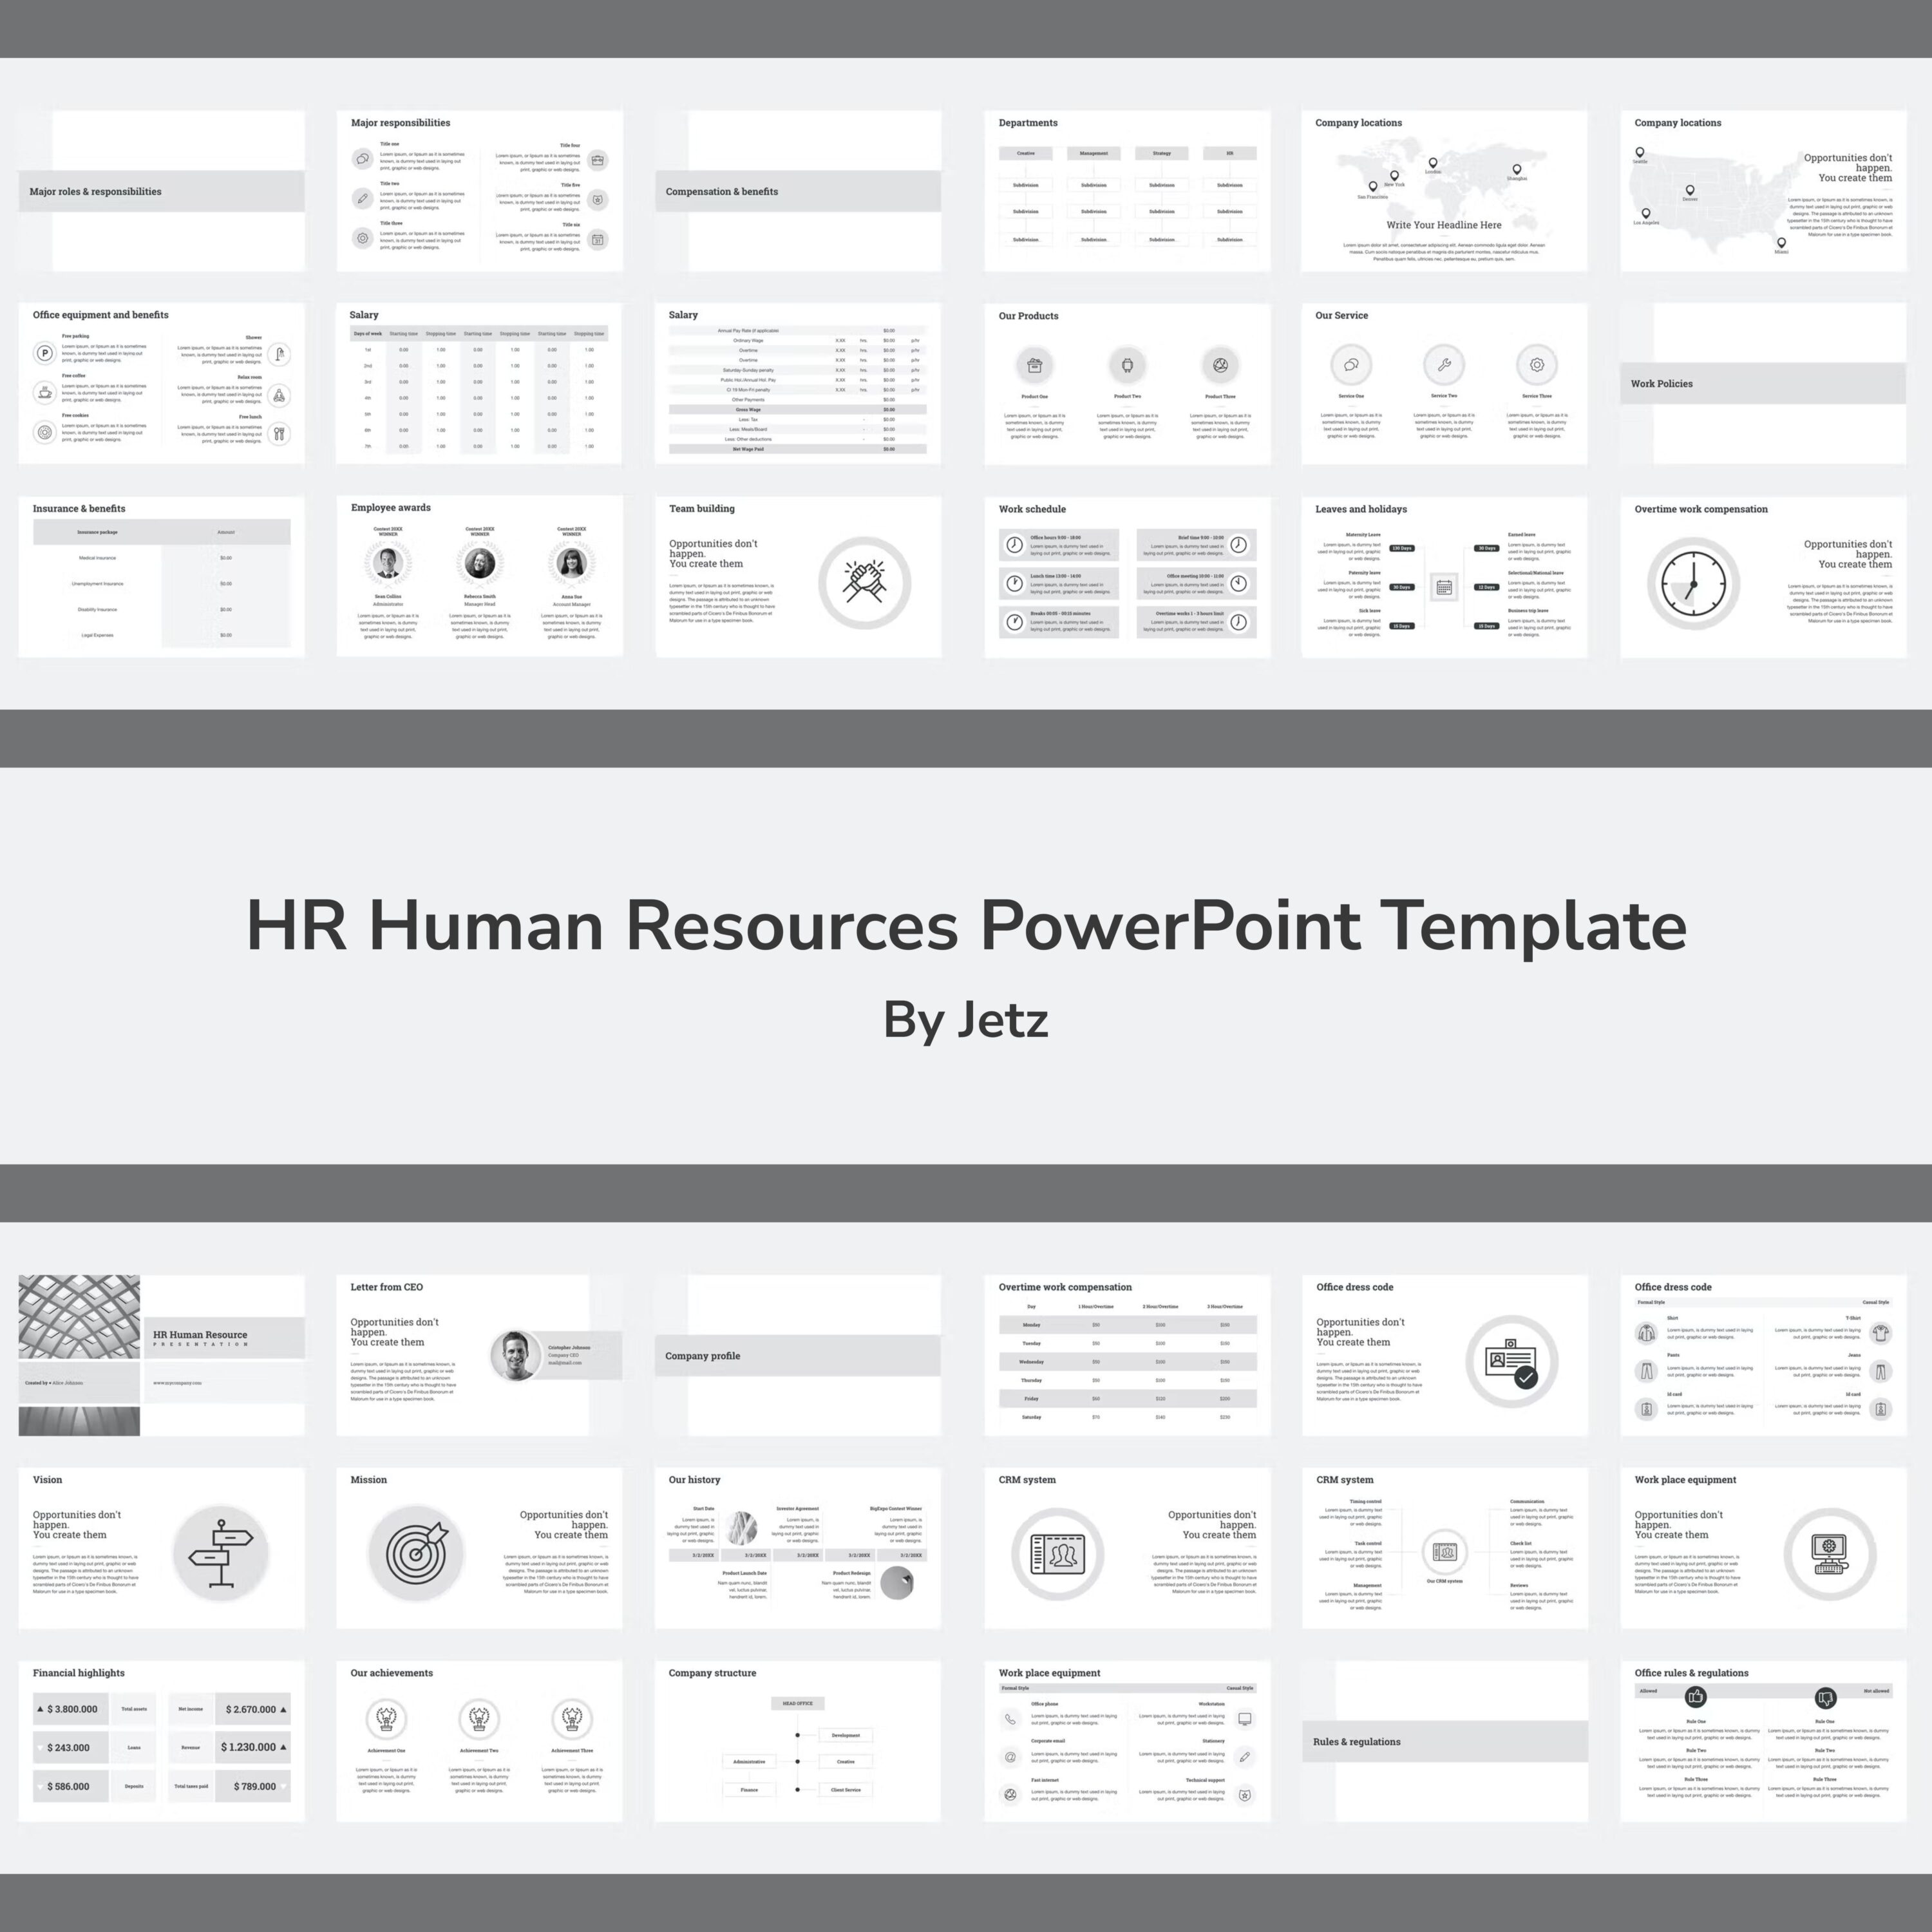 HR Human Resources PowerPoint Template.